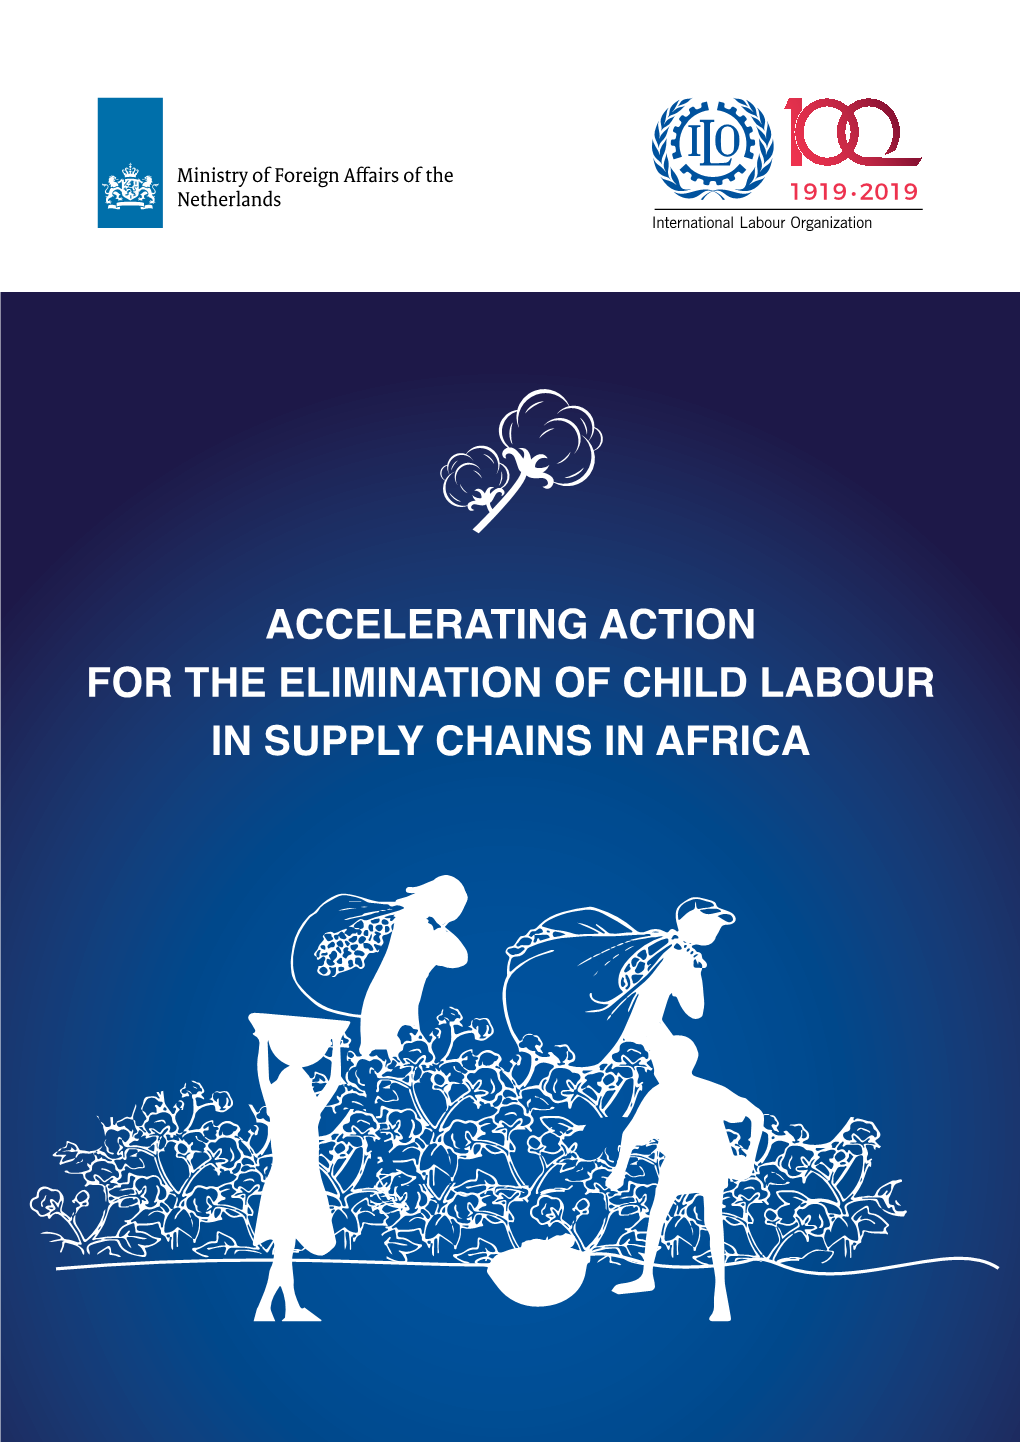 ACCELERATING ACTION for the ELIMINATION of CHILD LABOUR in SUPPLY CHAINS in AFRICA at a Glance